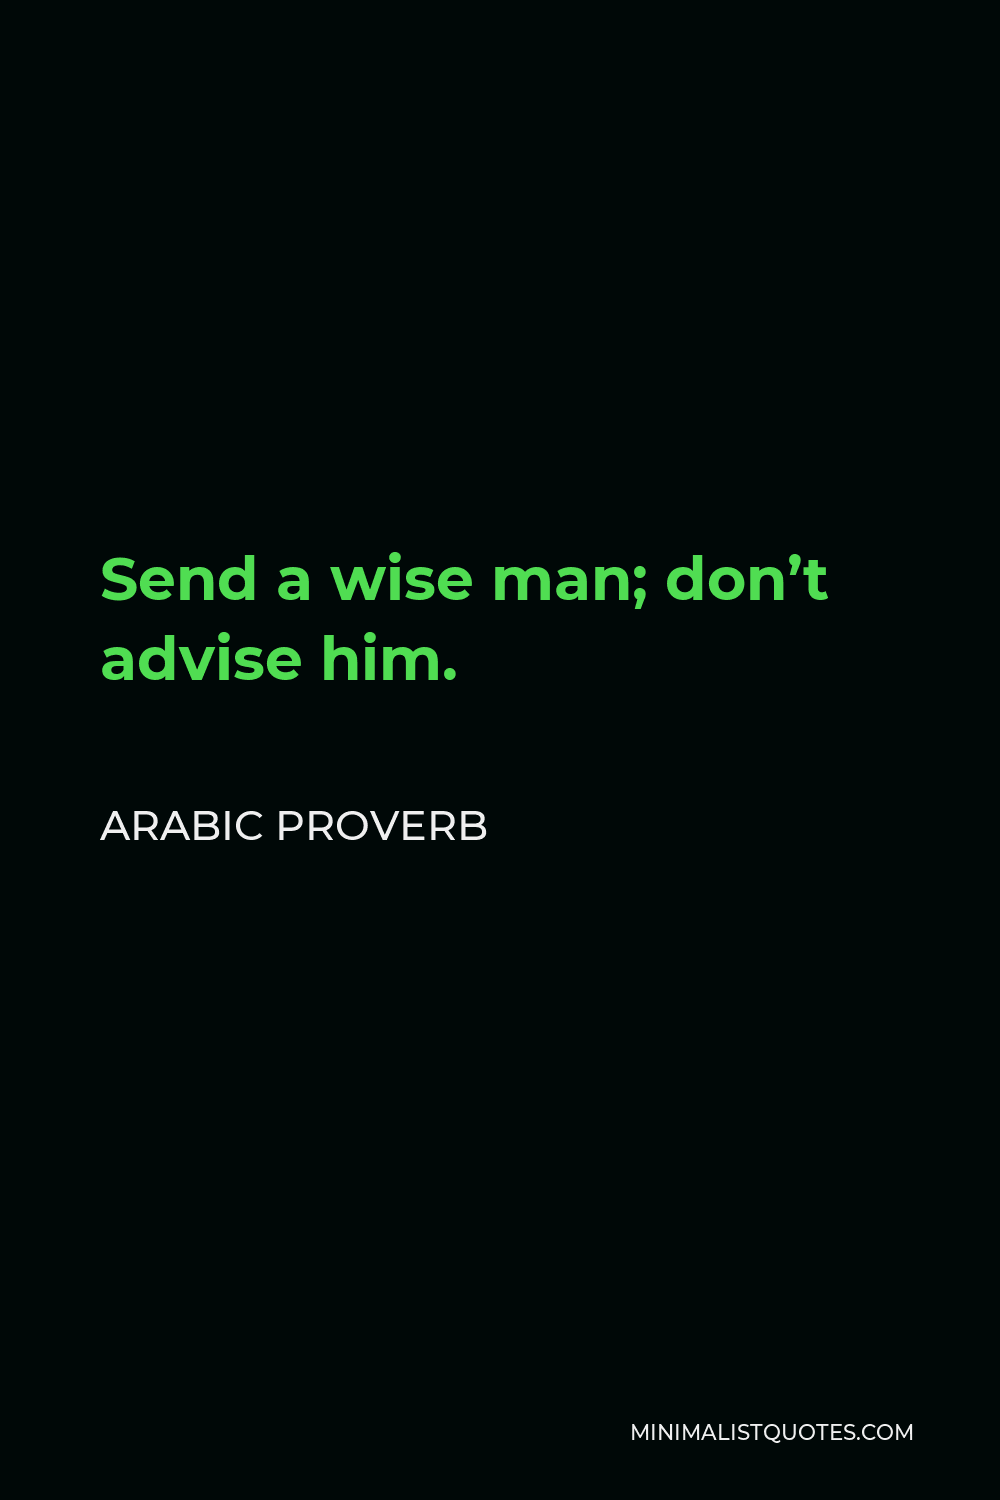 Arabic Proverb Quote - Send a wise man; don’t advise him.